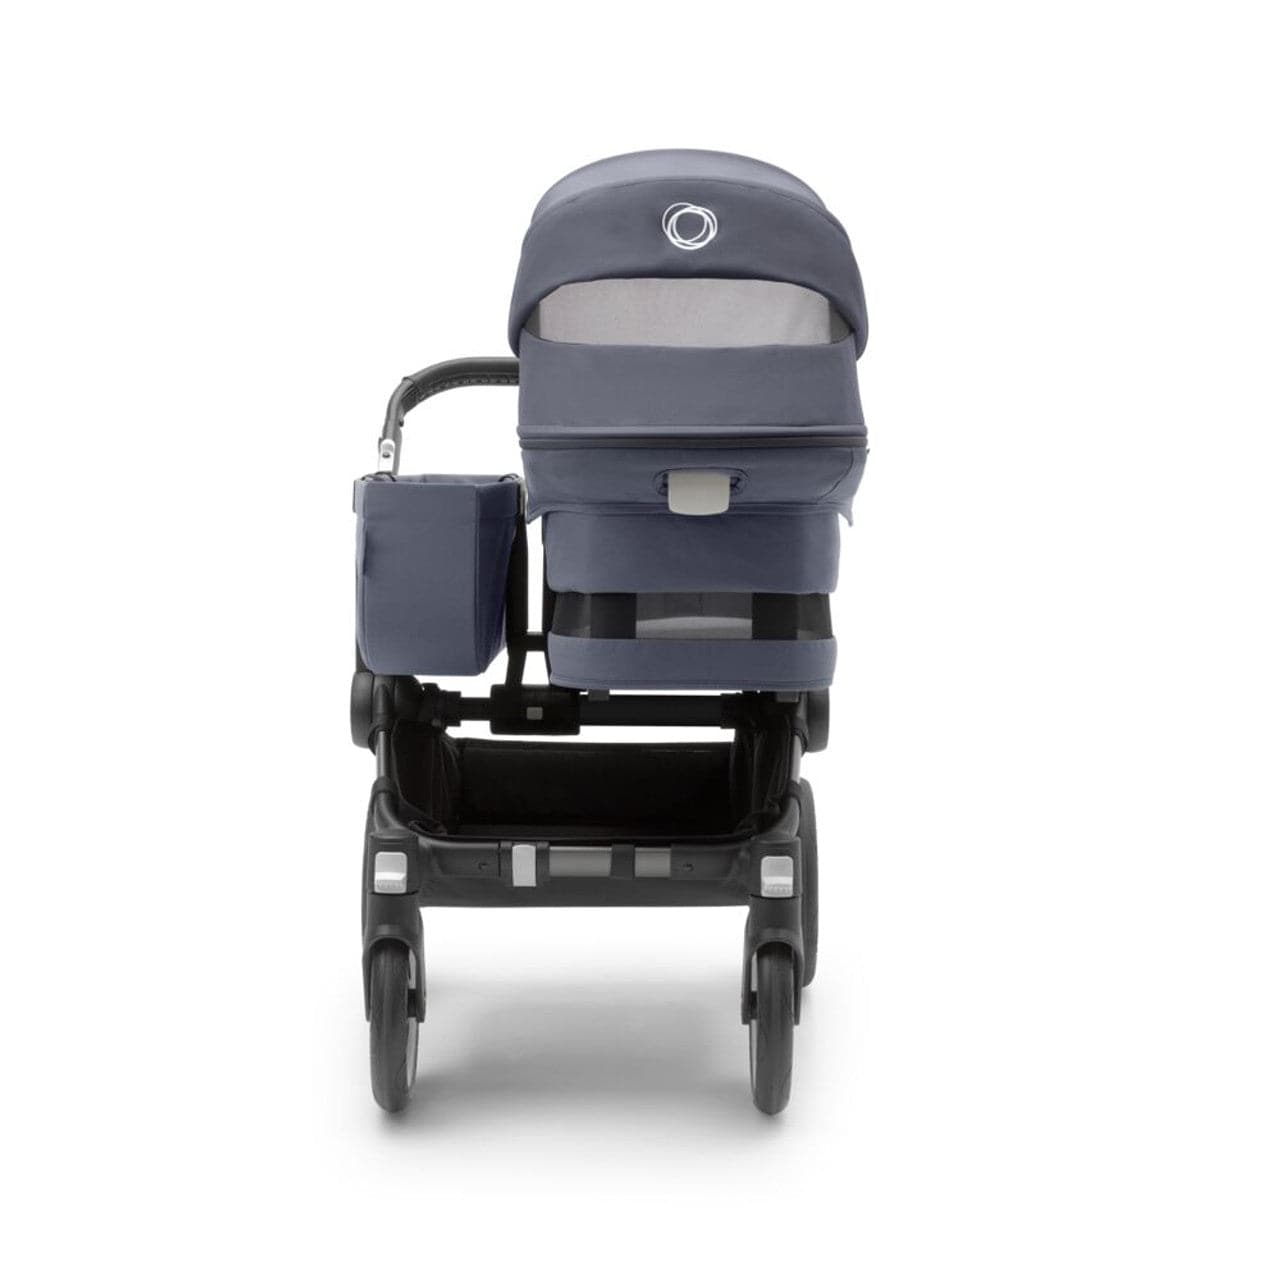 Bugaboo Donkey 5 Twin Complete Pushchair - Graphite/Grey Melange - For Your Little One